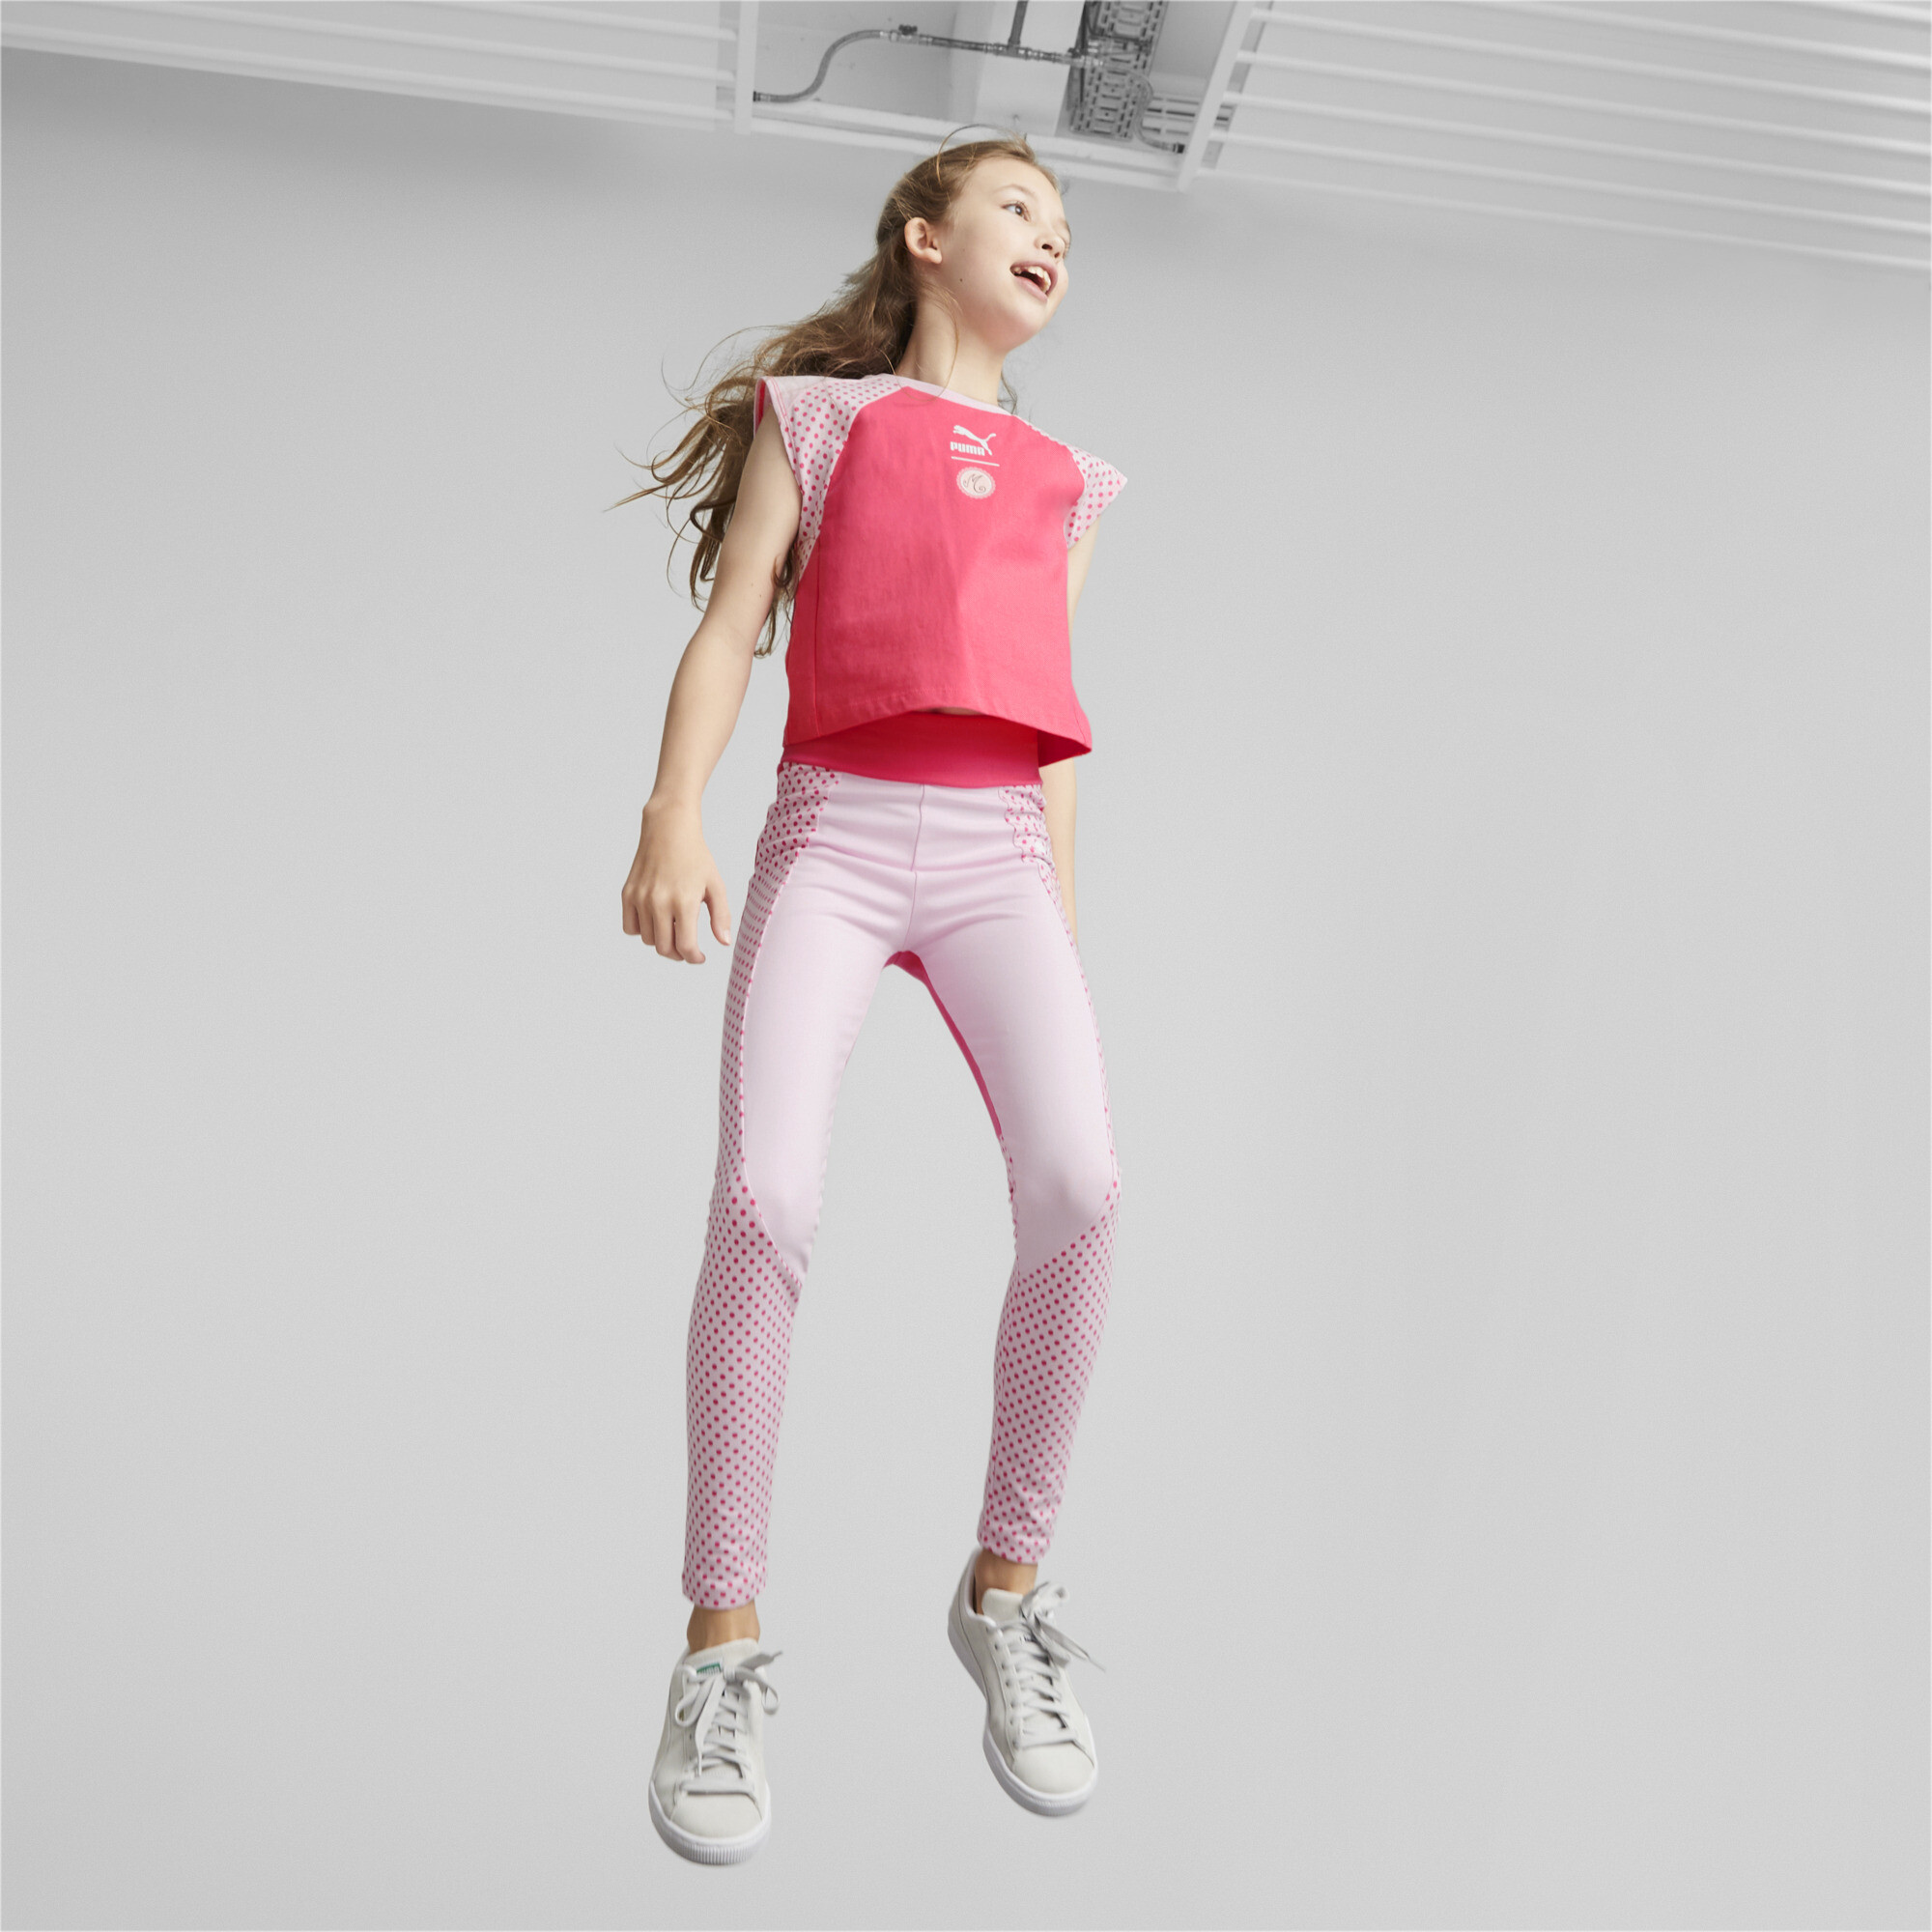 PUMA X MIRACULOUS Leggings In Pink, Size 9-10 Youth